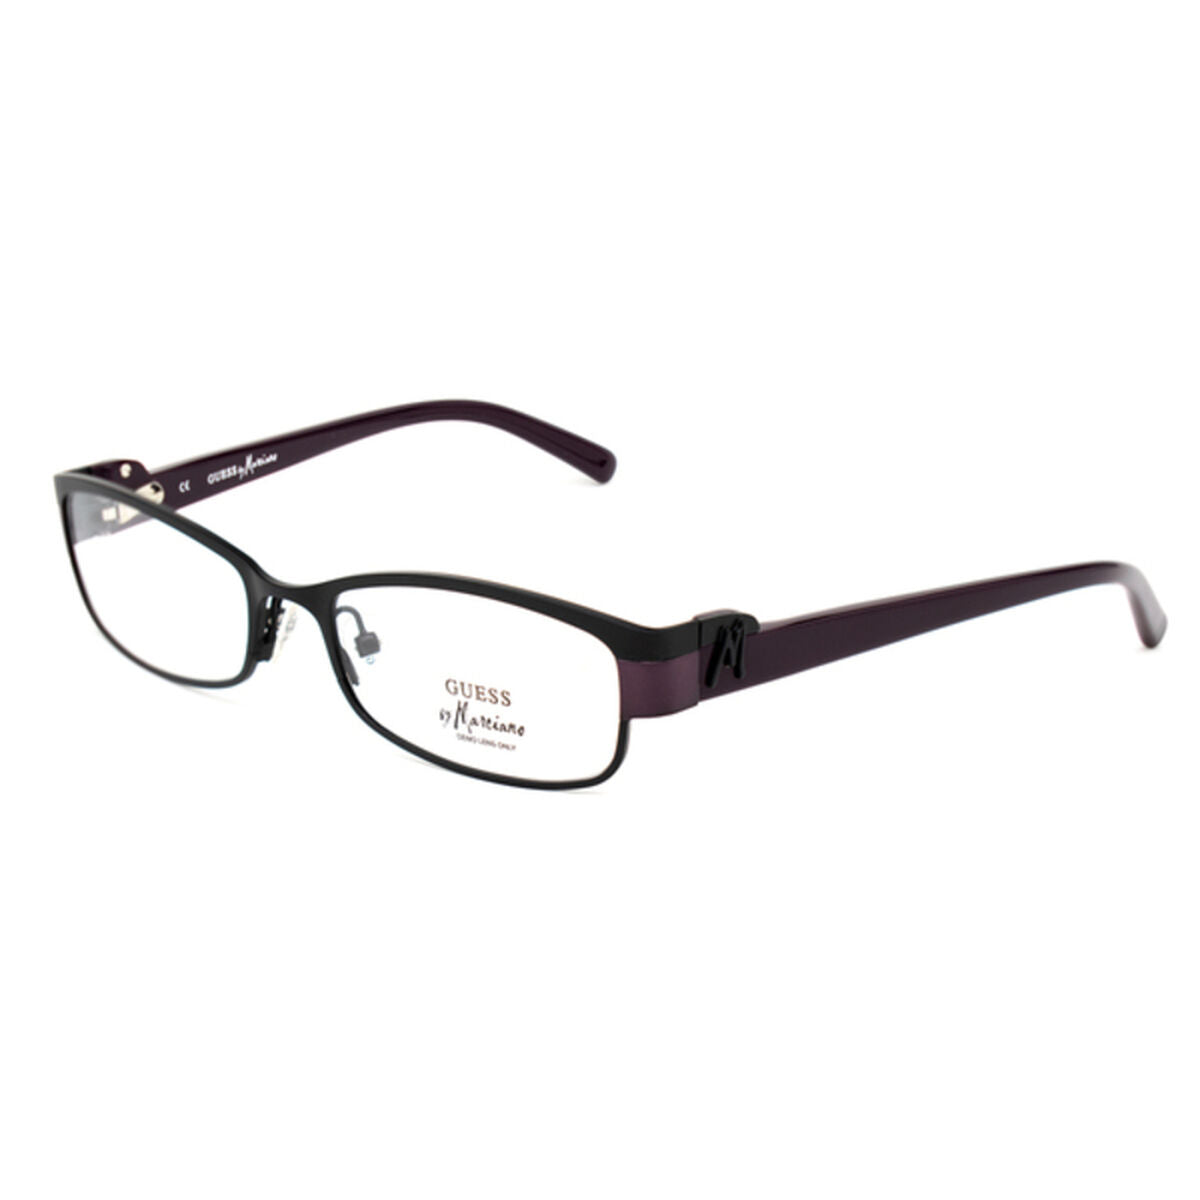 Ladies' Spectacle frame Guess Marciano GM111-BLACK